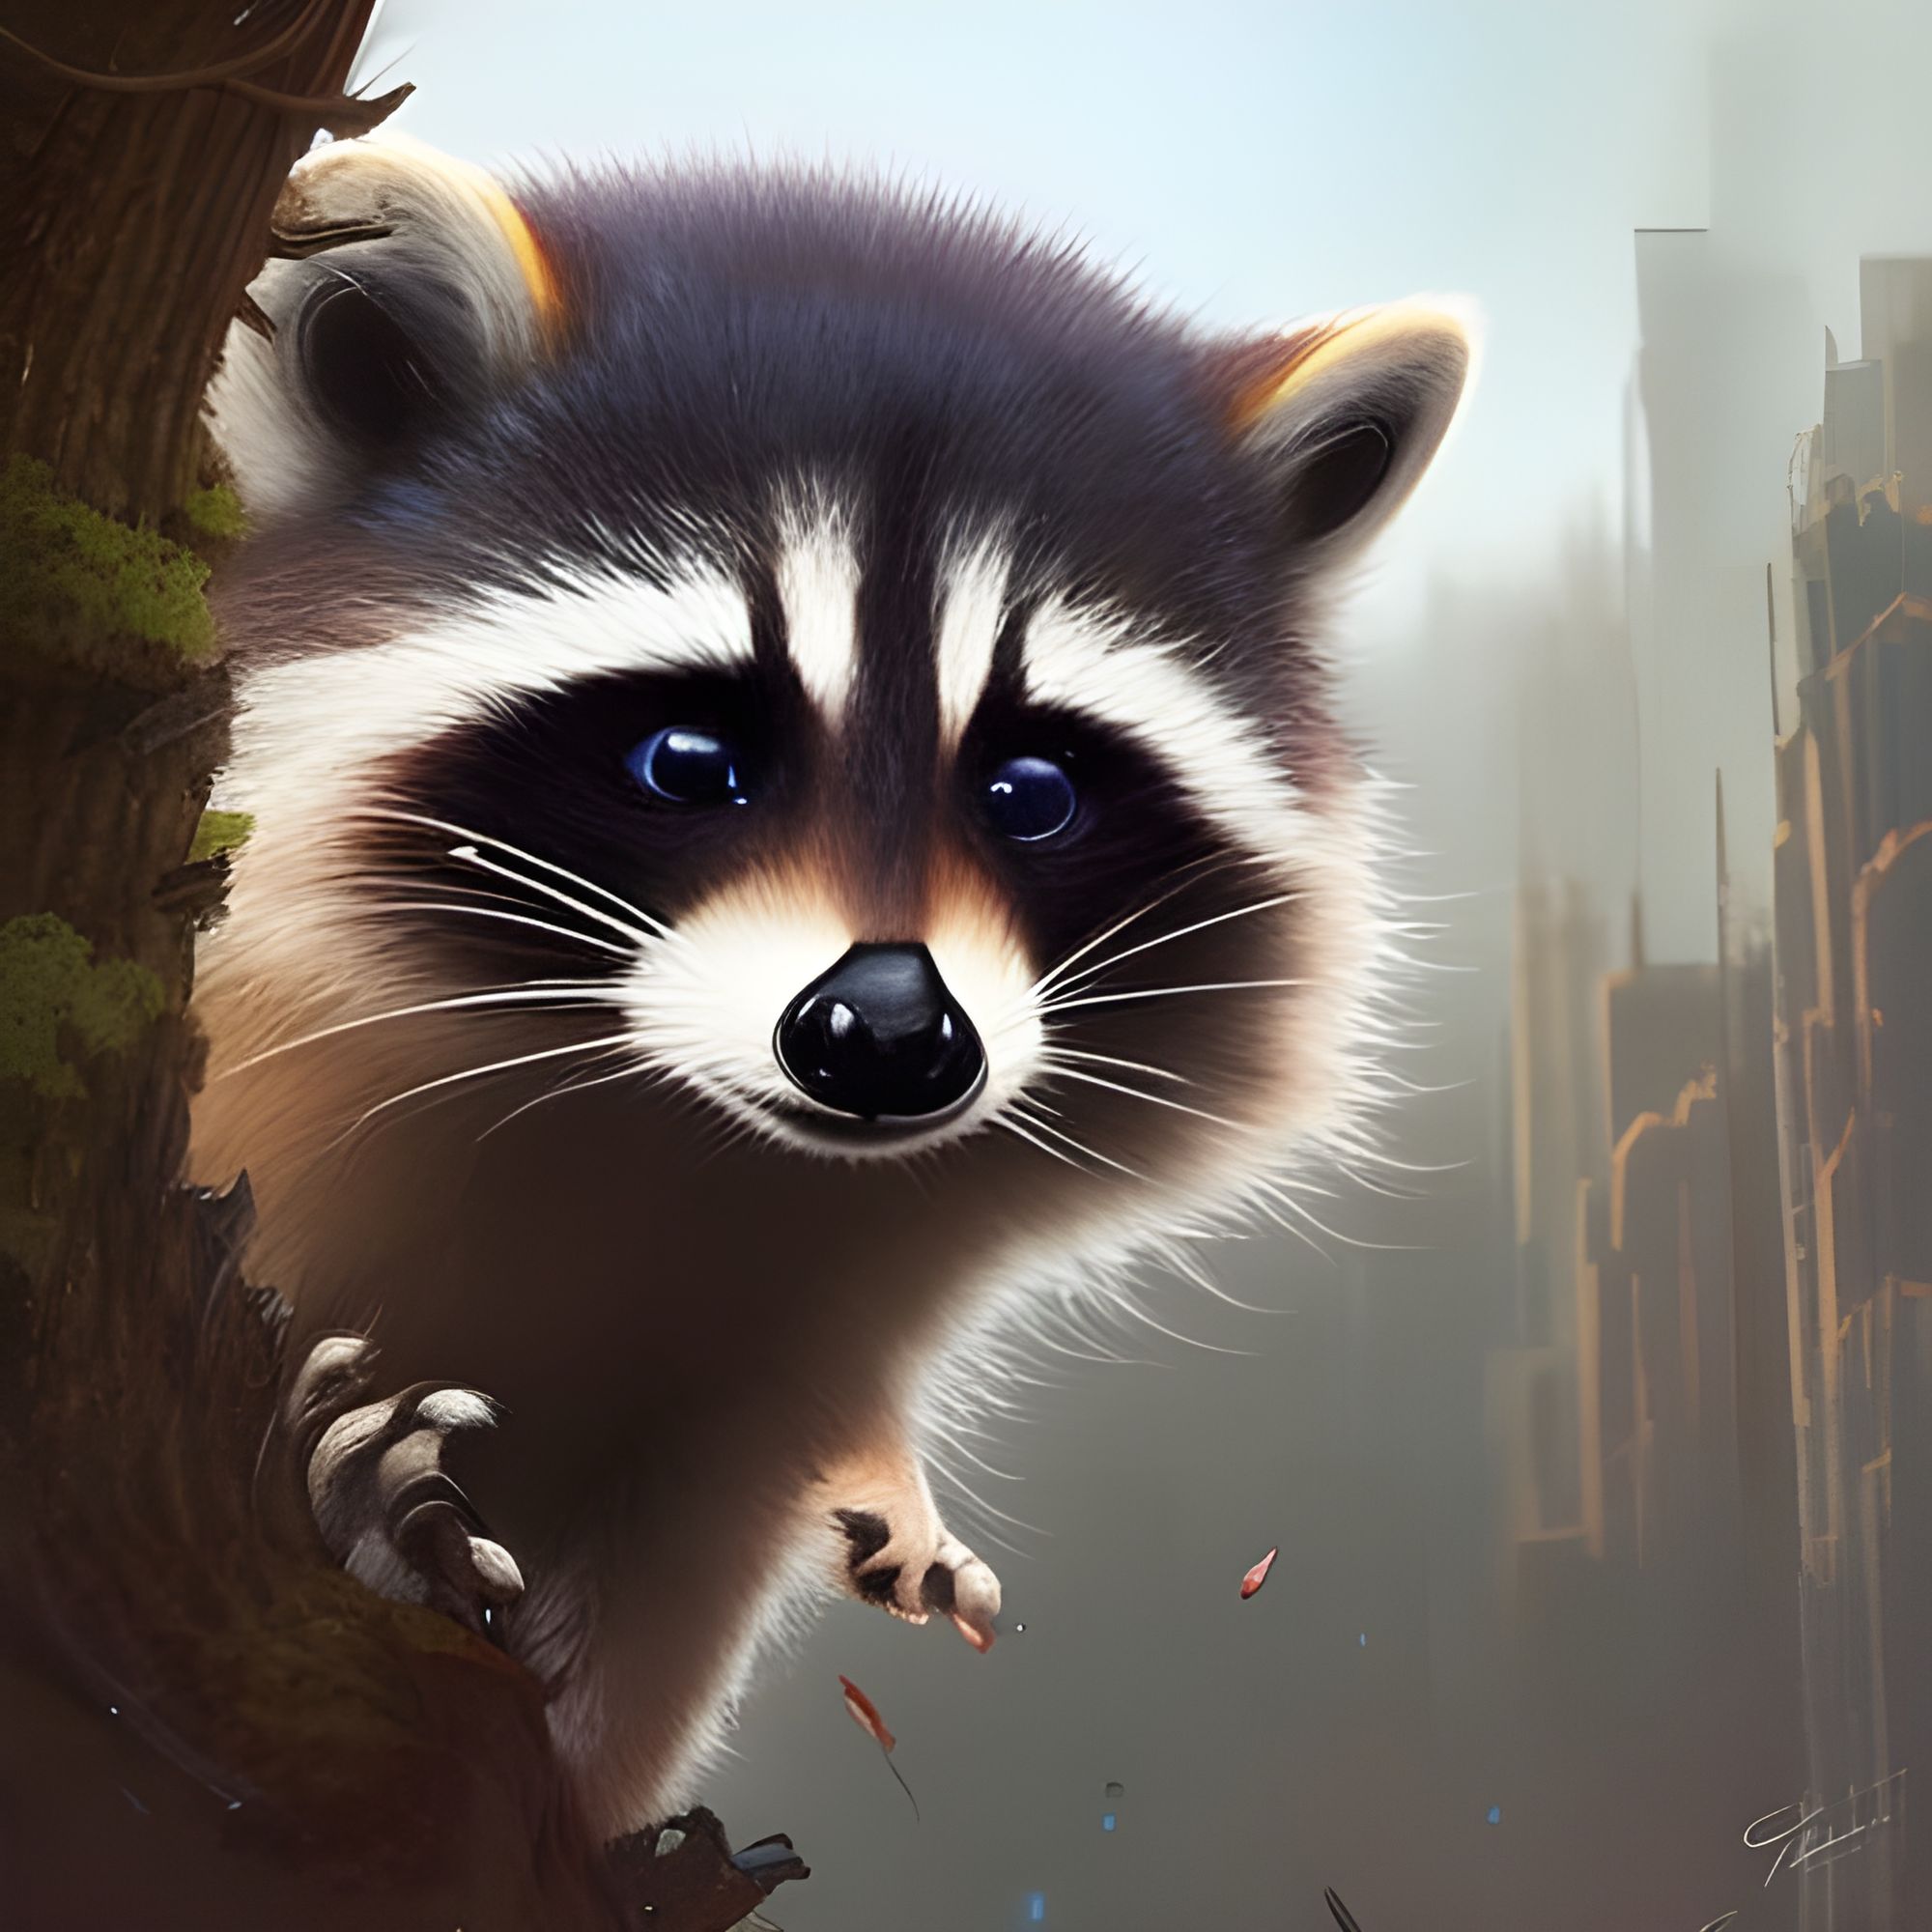 Giant racoon takes over city - AI Generated Artwork - NightCafe